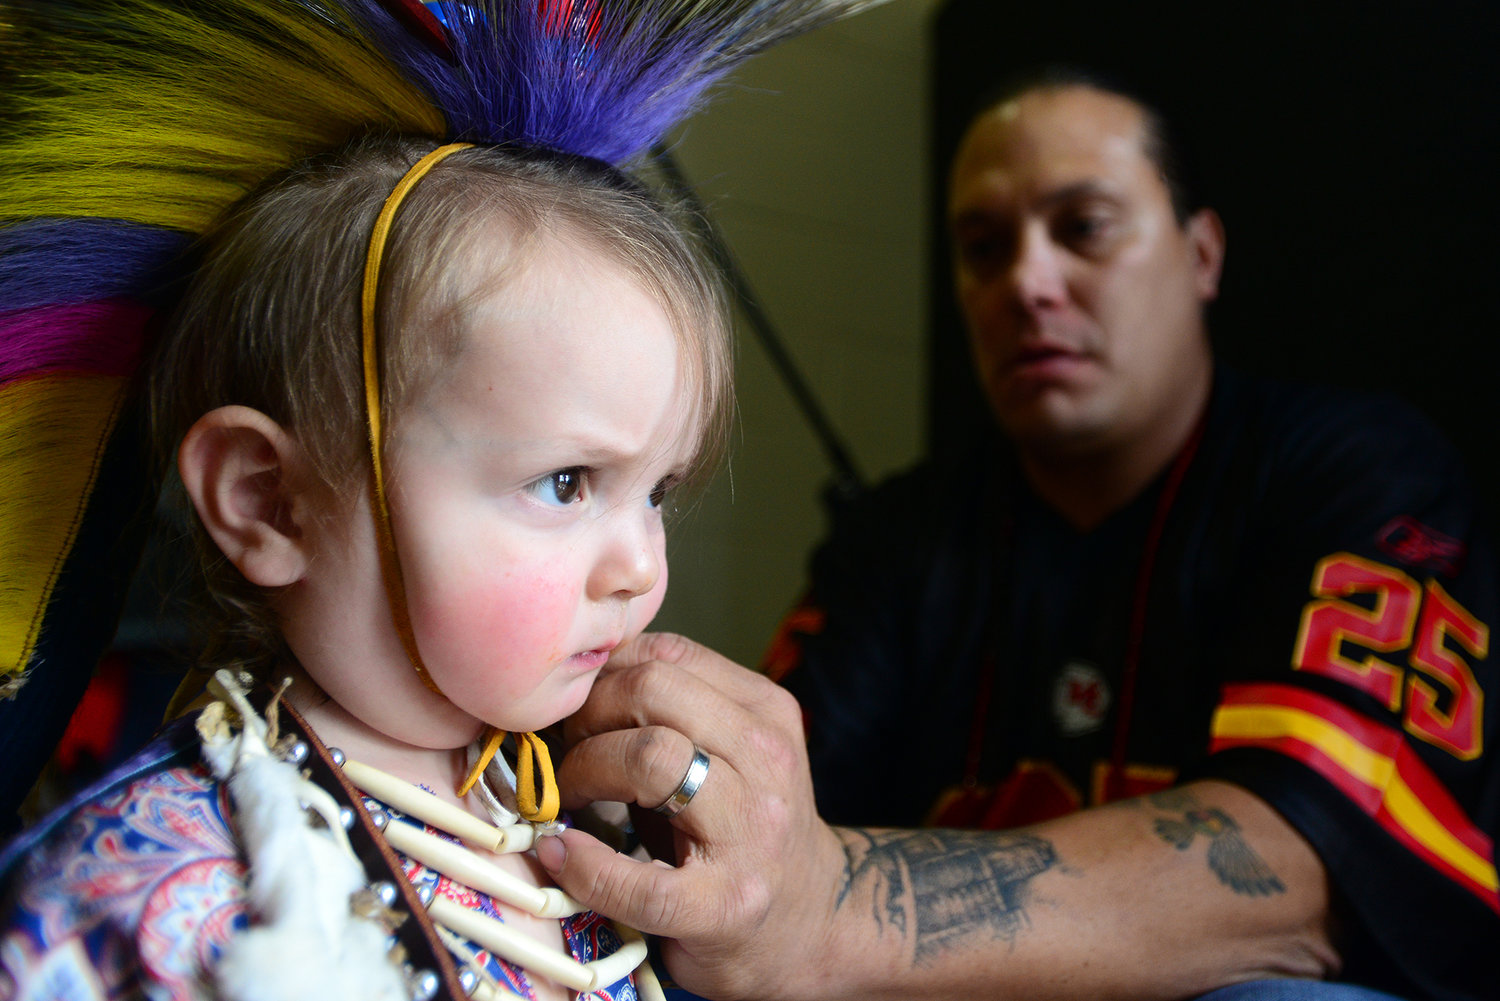 Owhi Littleleaf of Warm Springs, Ore., right, resizes the headdress strap for his son, Chayton, 1 1/2 years old, prior to the start of the intertribal dance at the 14th Annual Cowlitz Indian Tribe Pow-Wow at Toledo High School in Toledo, Wash., on Saturday, Sept. 21, 2013. Several hundred people attended the day-long event that featured dance contests, food vendors and raffles.